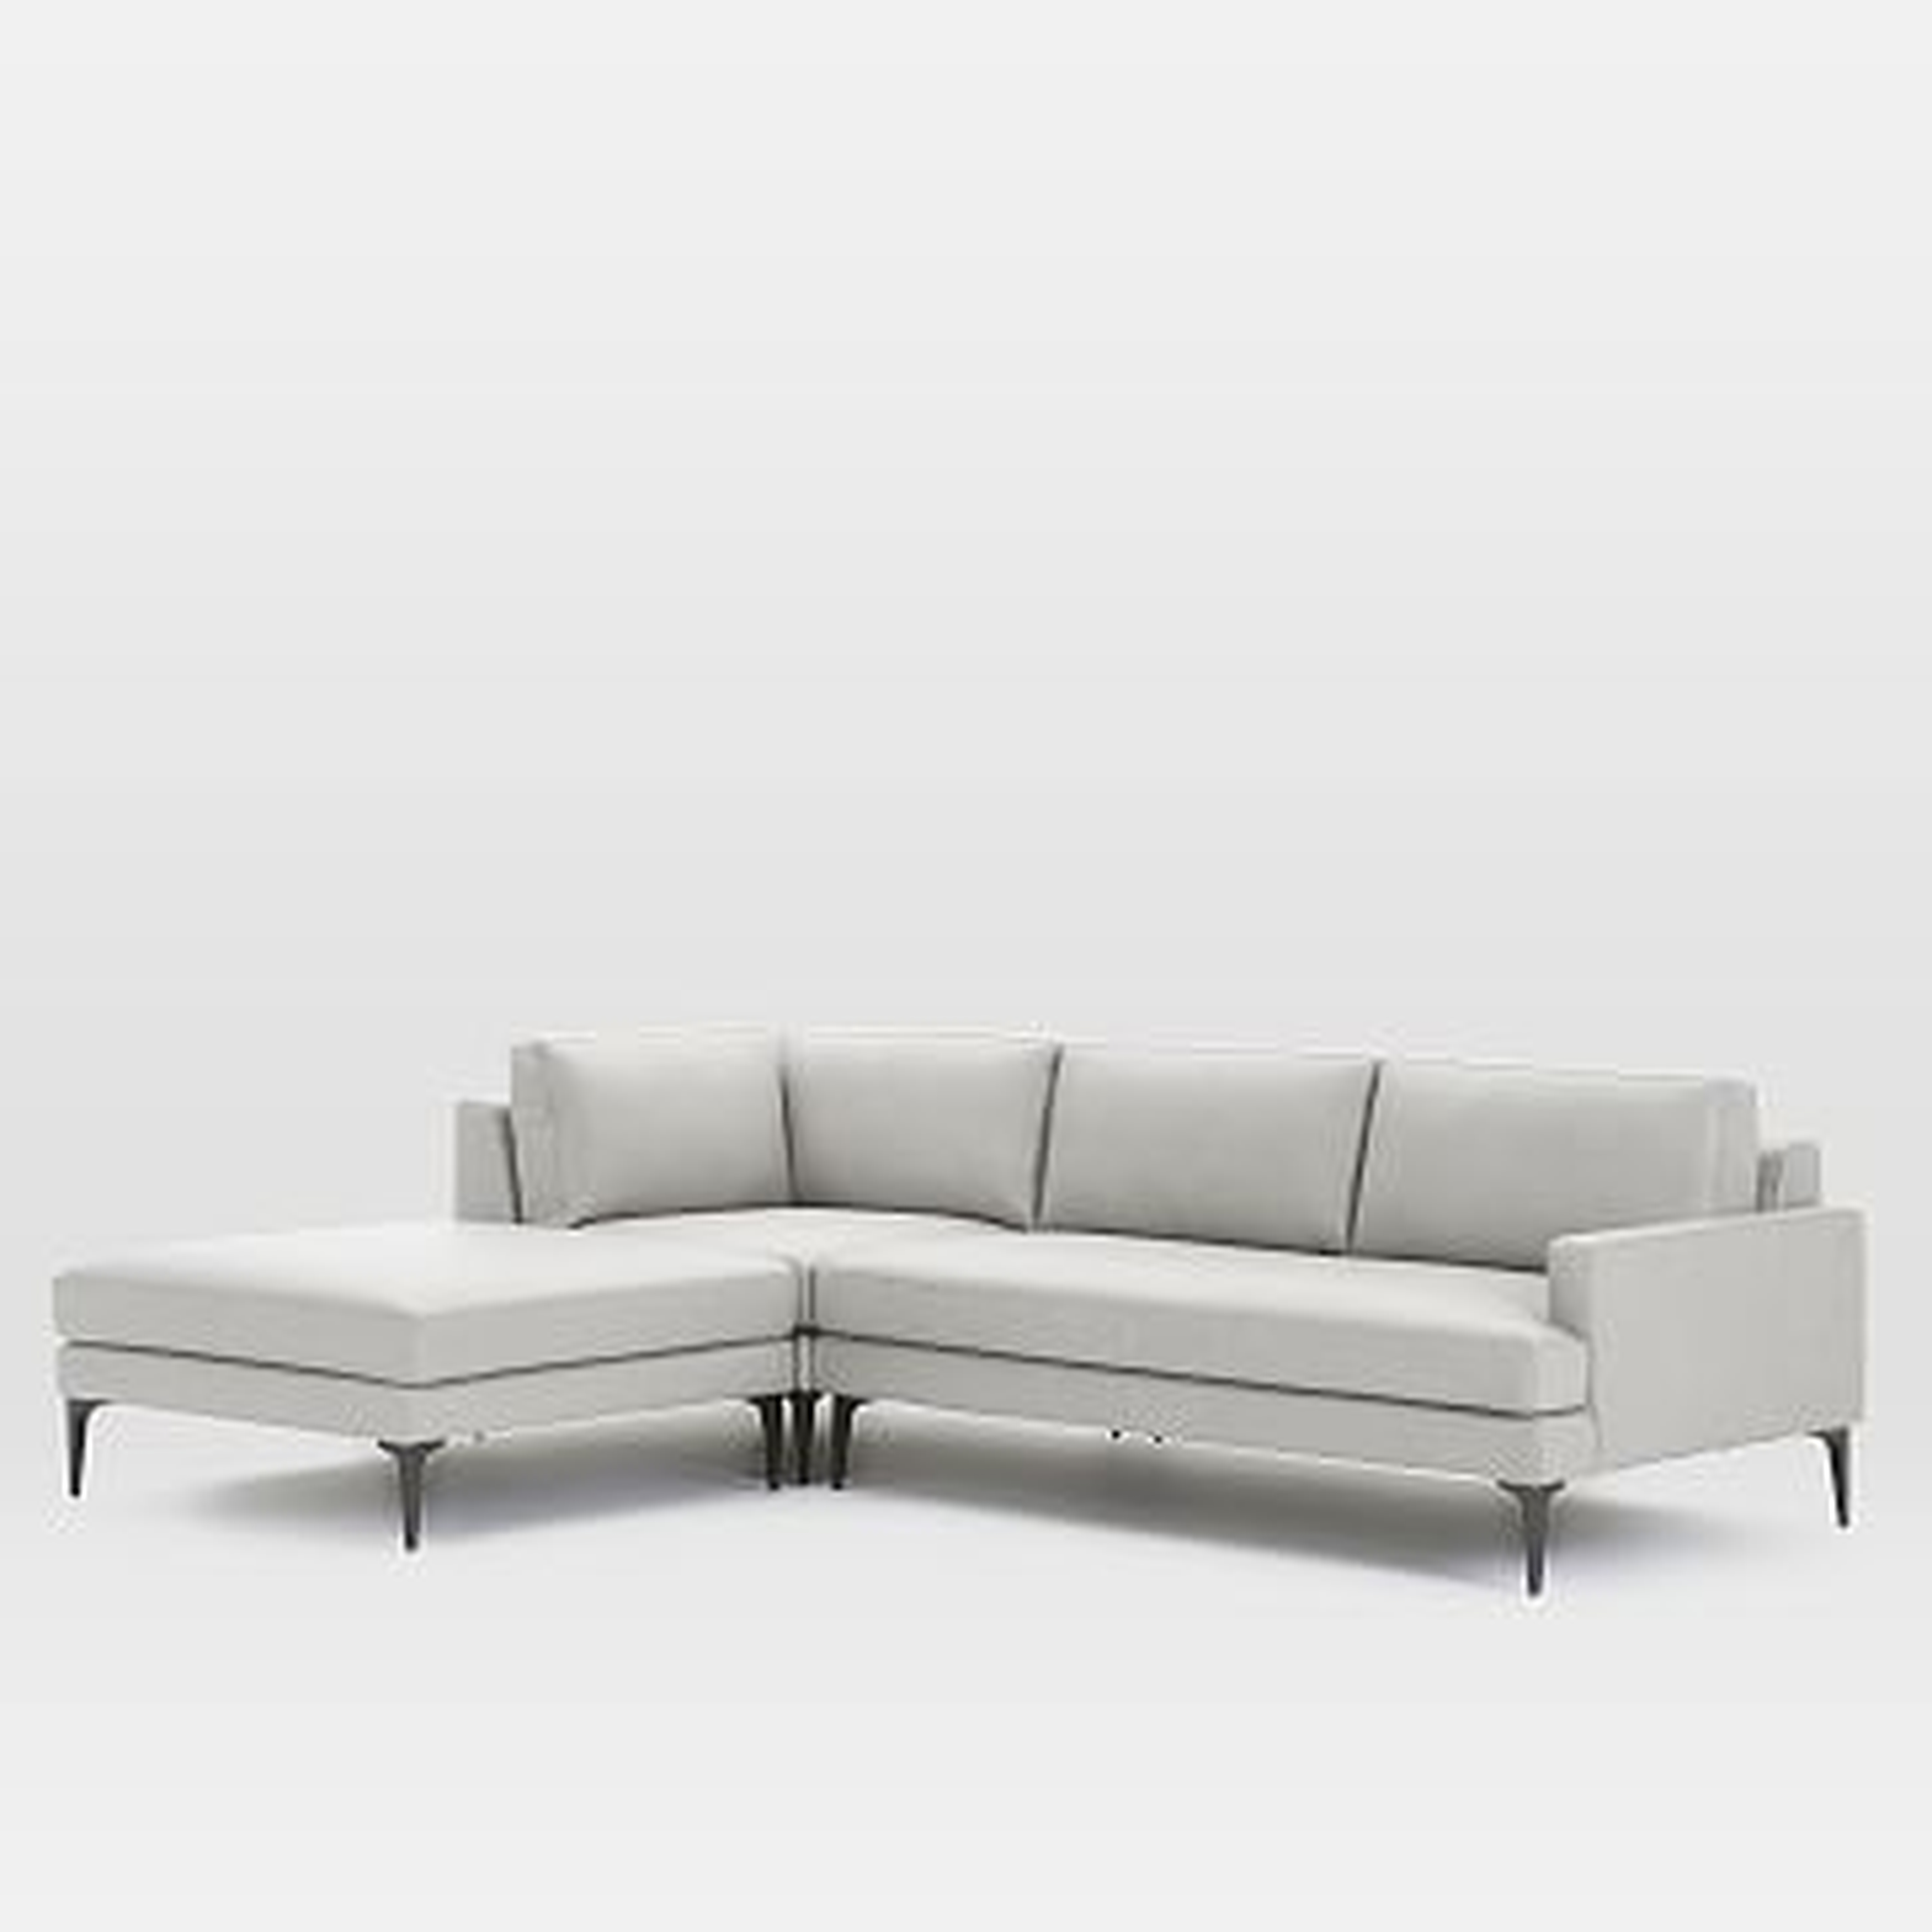 Andes Set 2: Right 2.5 Seater Sofa, Ottoman, Corner, Leather, Cement - West Elm